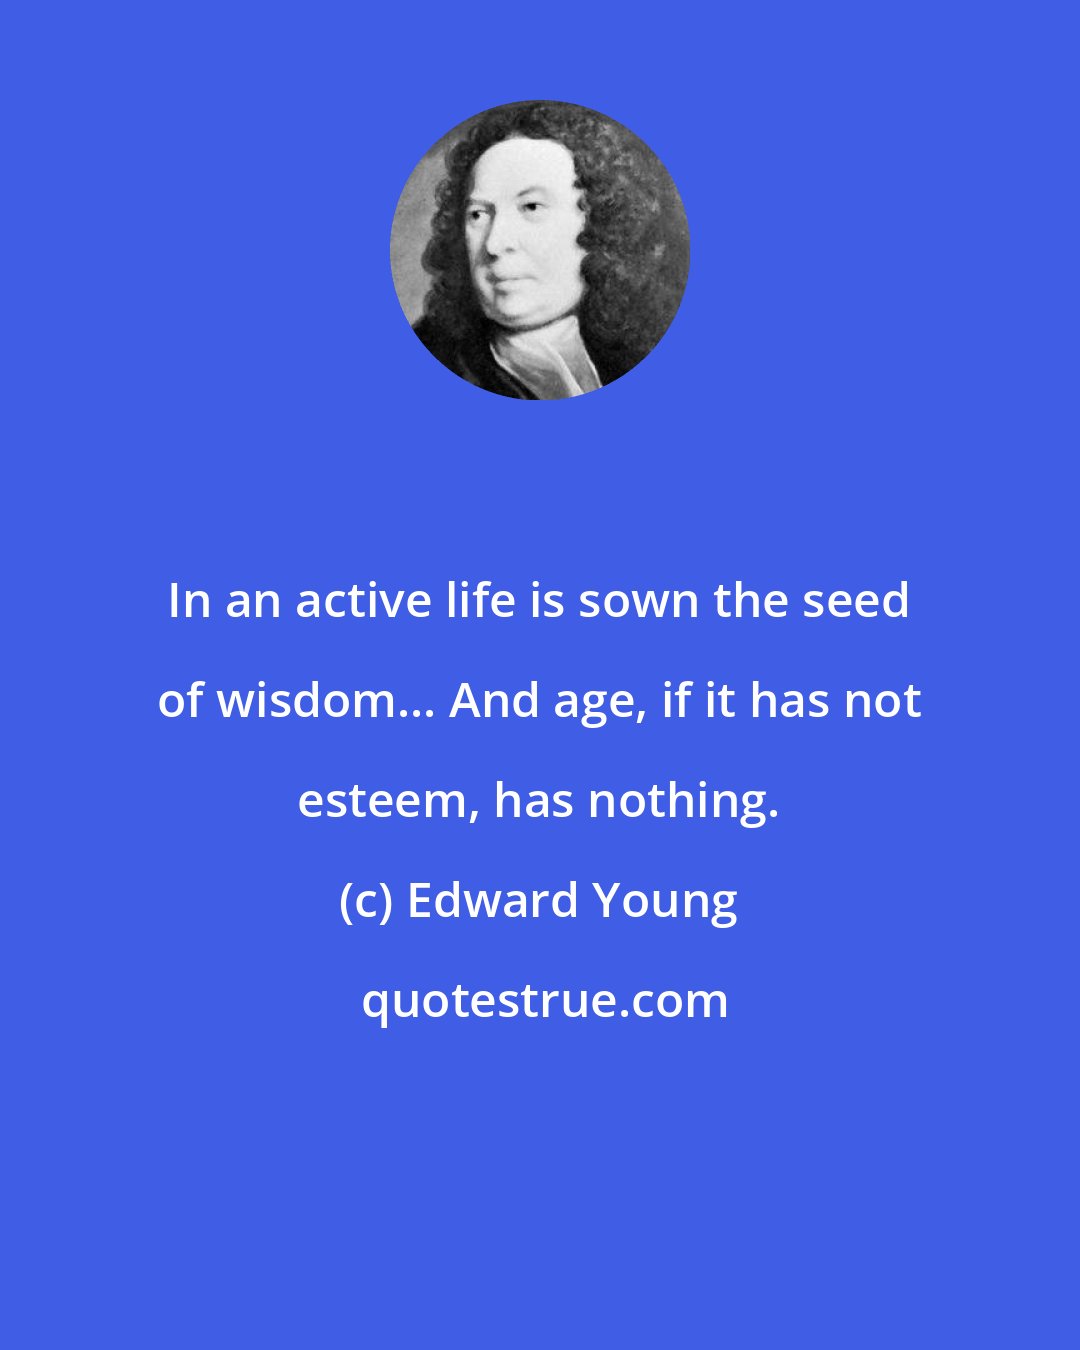 Edward Young: In an active life is sown the seed of wisdom... And age, if it has not esteem, has nothing.